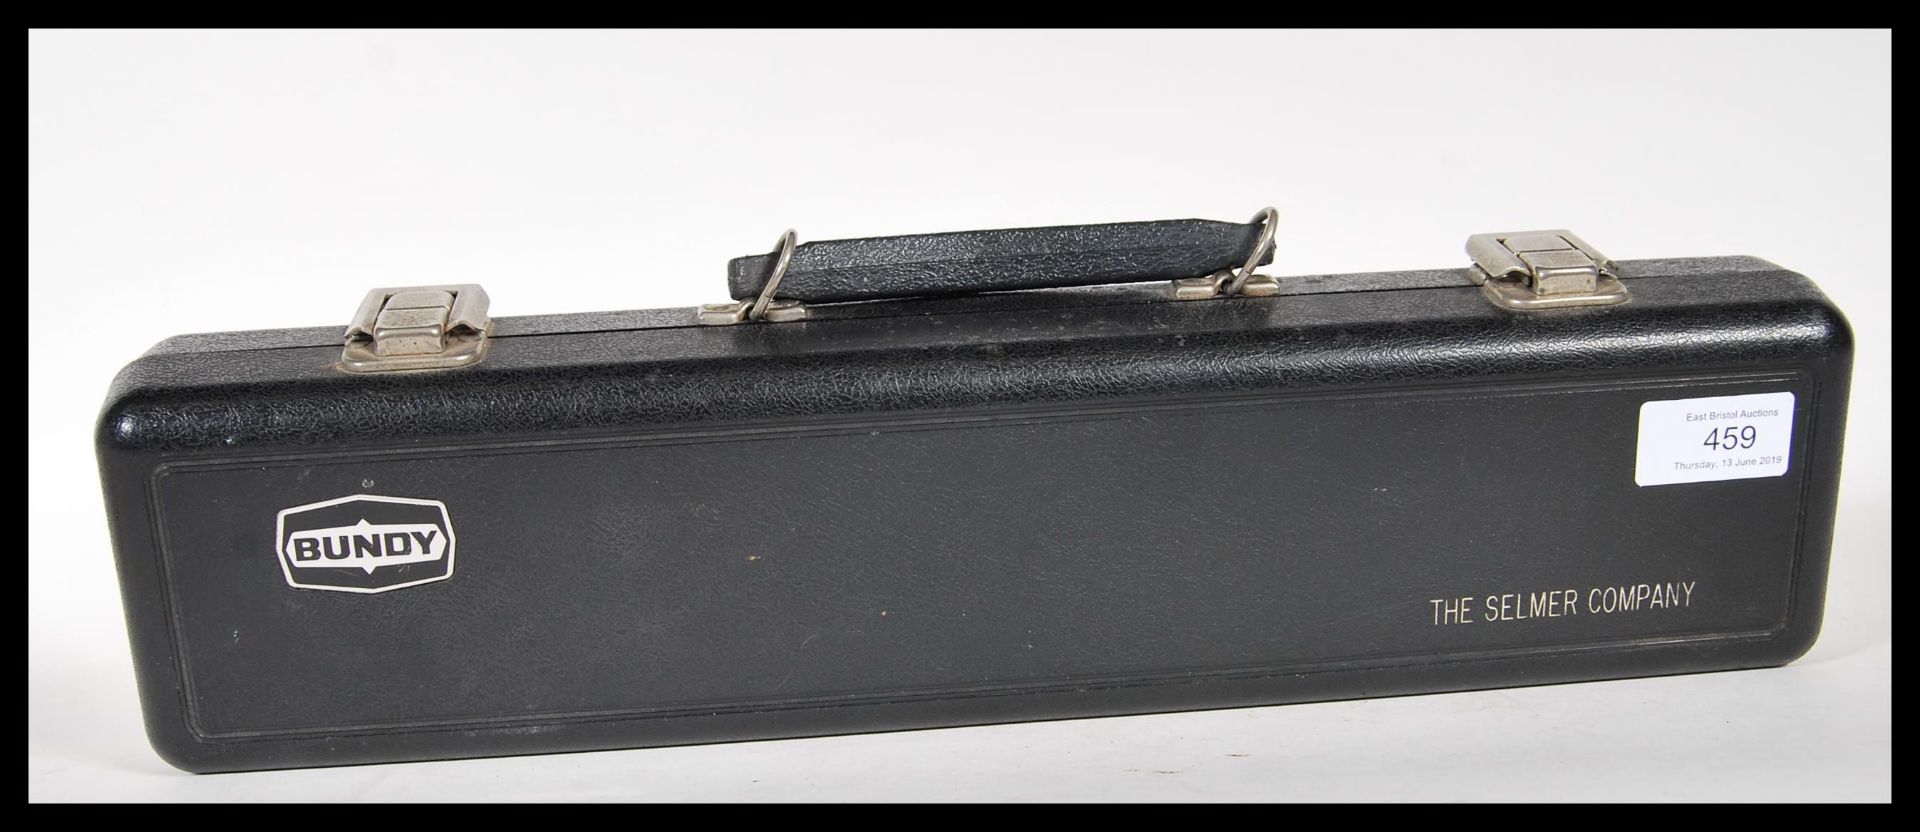 A Bundy Selmar Company nickel plated three part flute within a fitted velvet lined carry case - Image 7 of 7